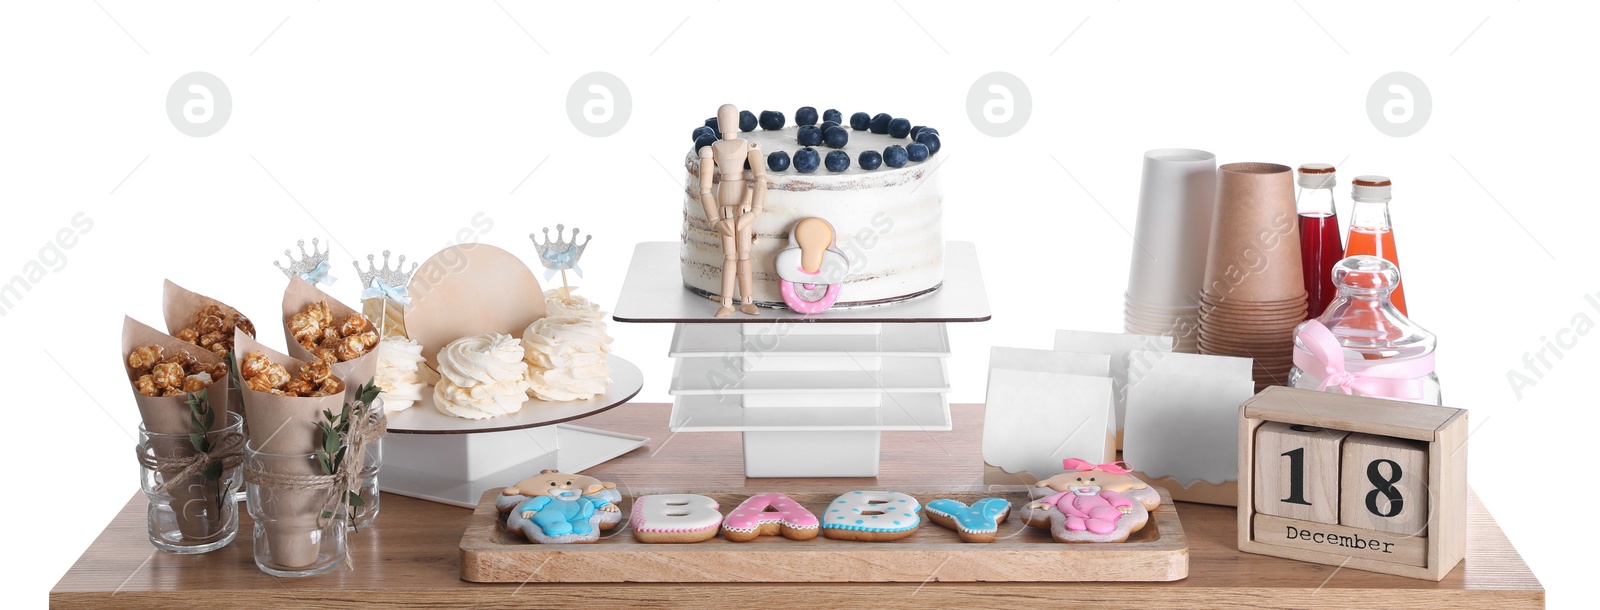 Photo of Baby shower party. Different delicious treats and decor on wooden table against white background